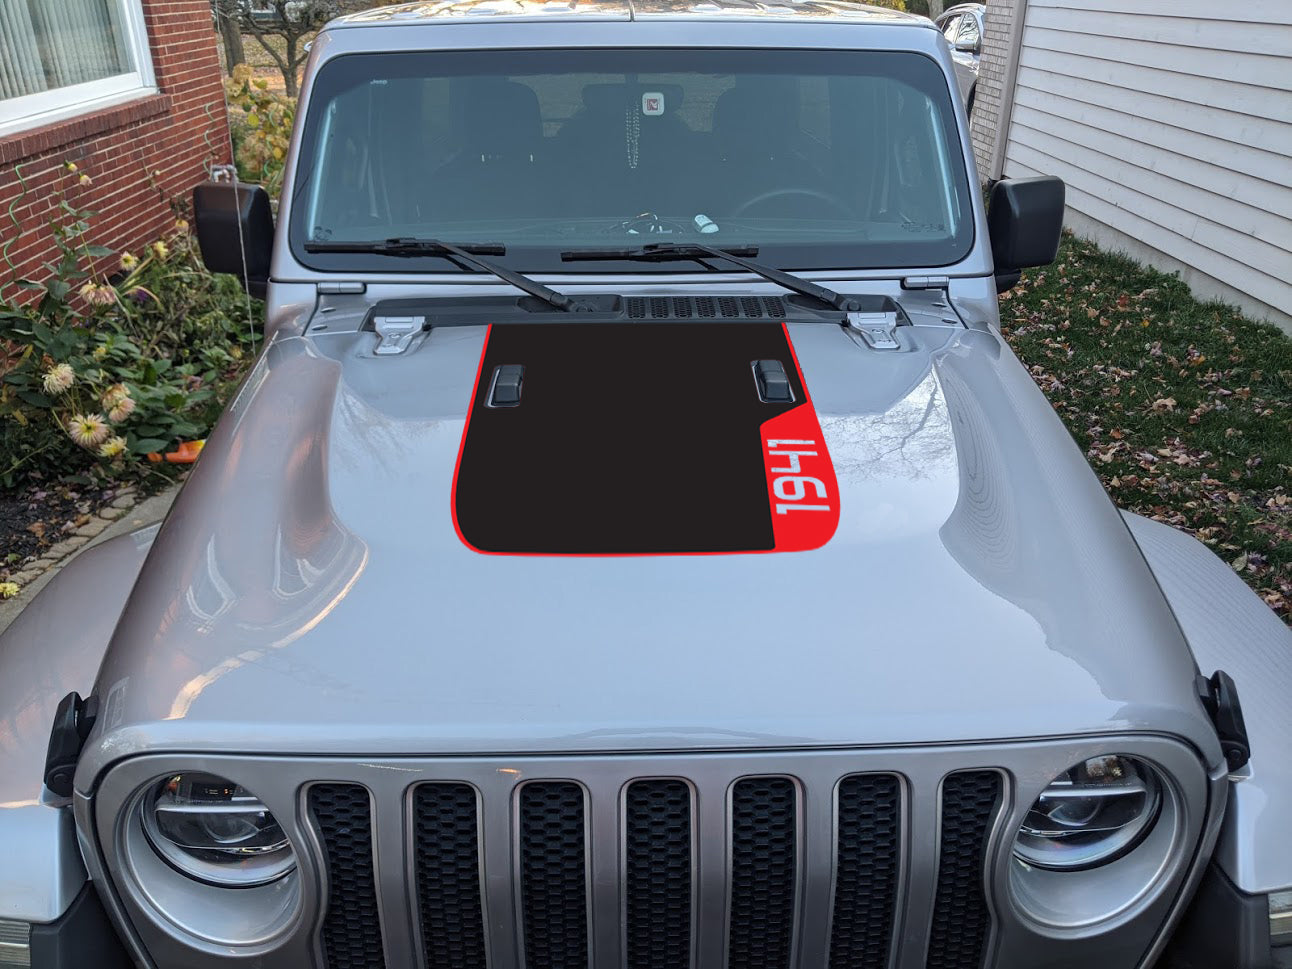 2-Layer 1941 Red Line Rubicon Blackout Hood Decal- Fits Jeep Wrangler & Gladiator JL Hood Decal 2-Layer Decal